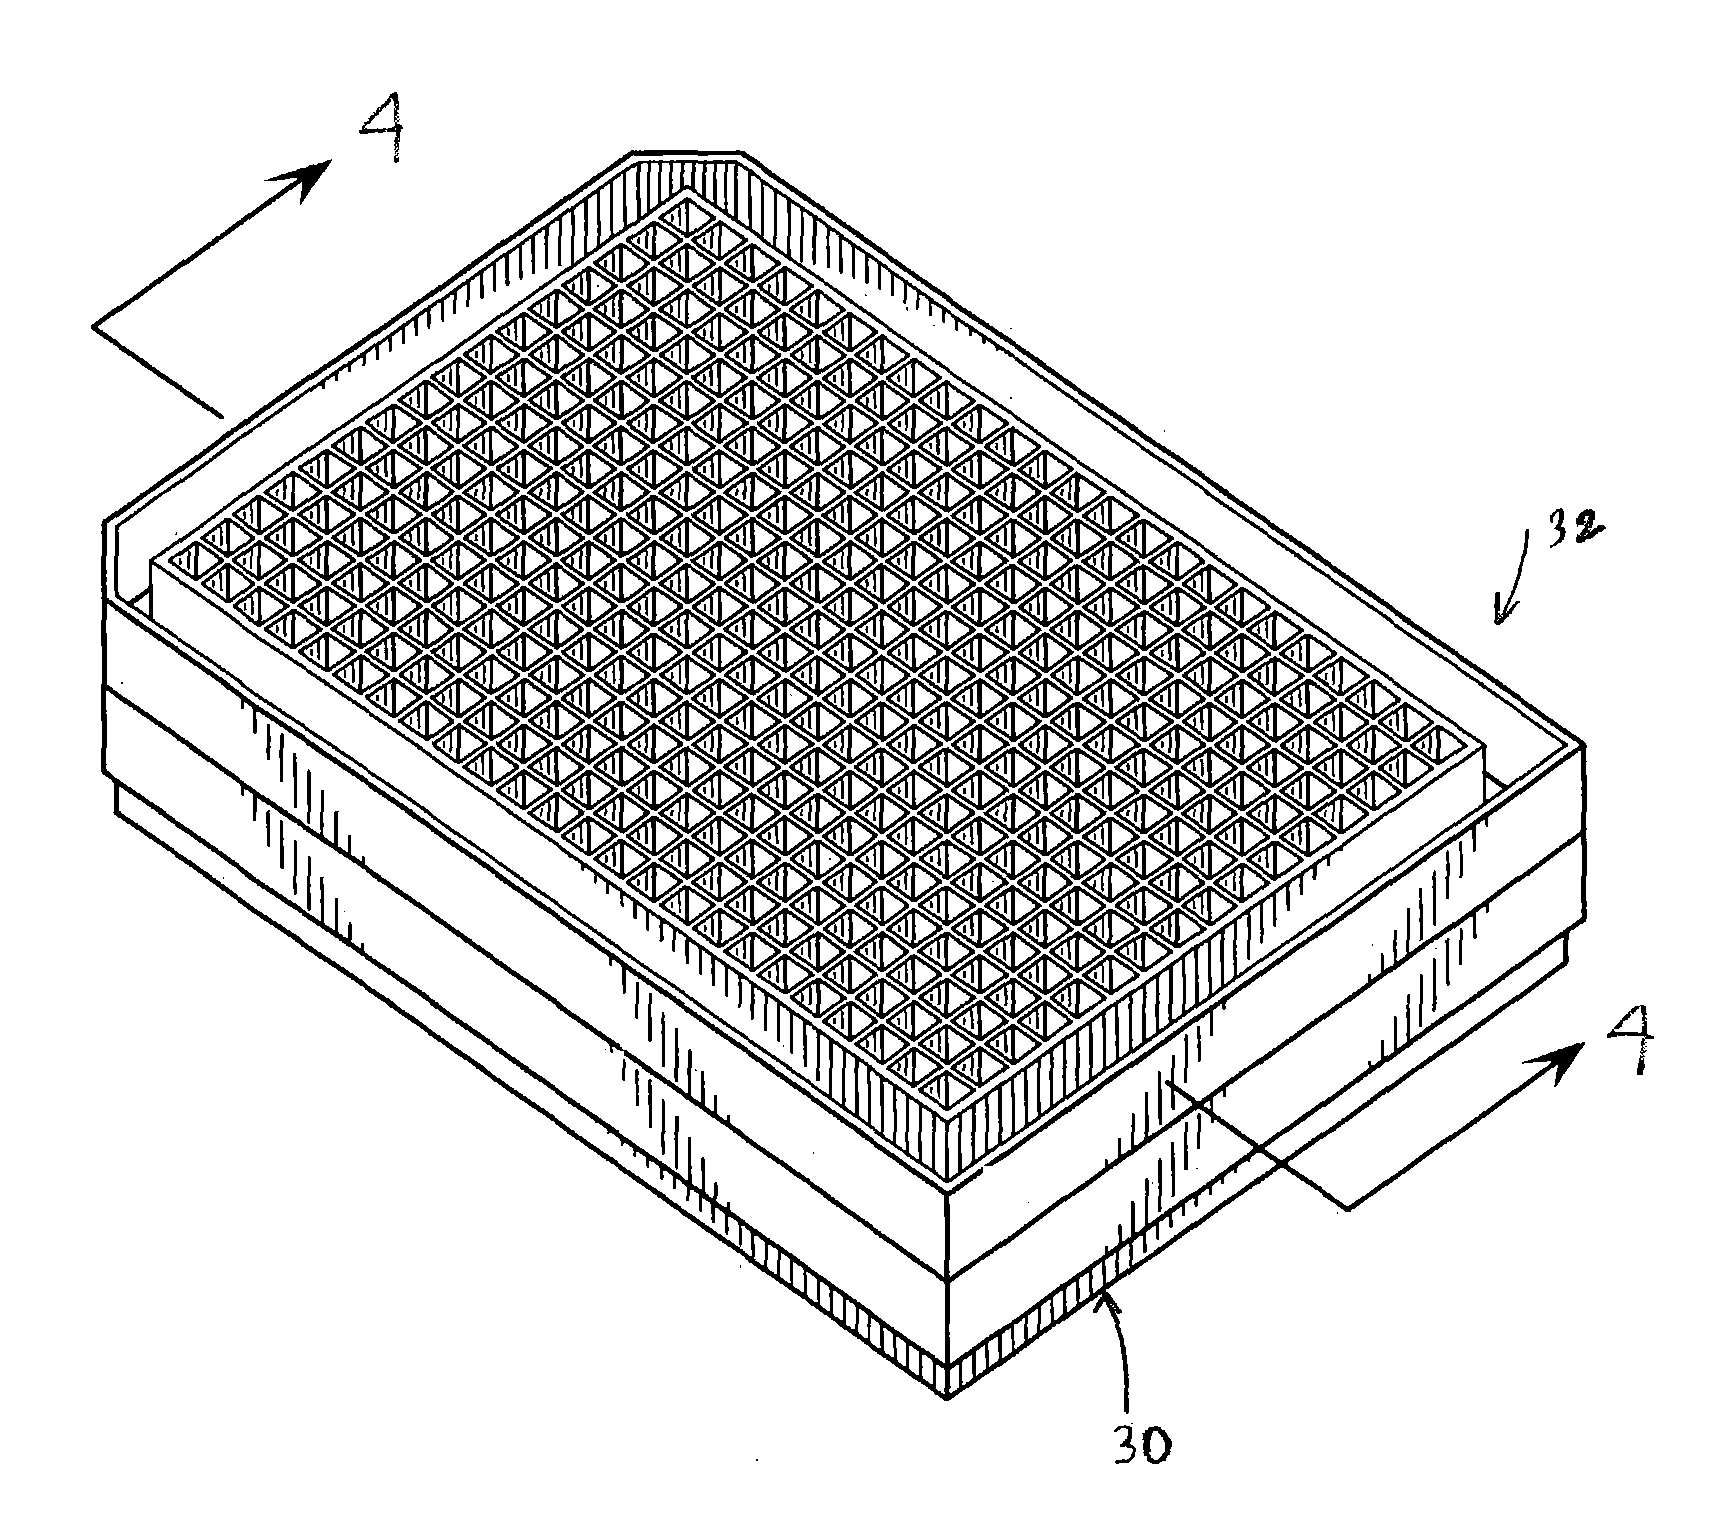 Methods and apparatus for minimizing evaporation of sample materials from multiwell plates